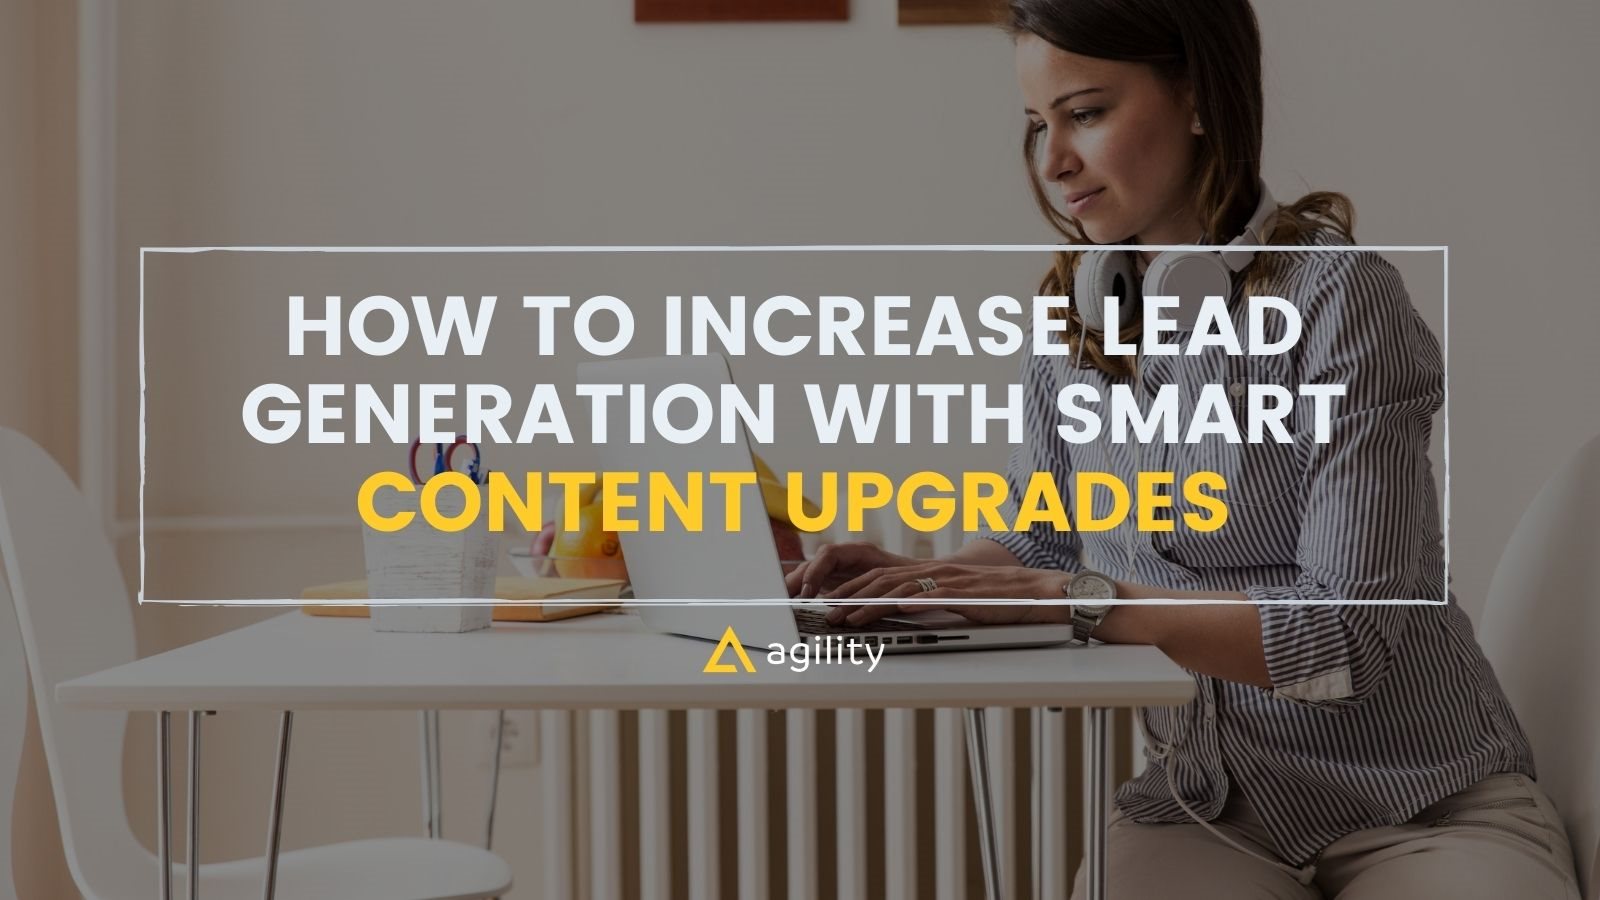 How to Increase Lead Generation with Smart Content Upgrades